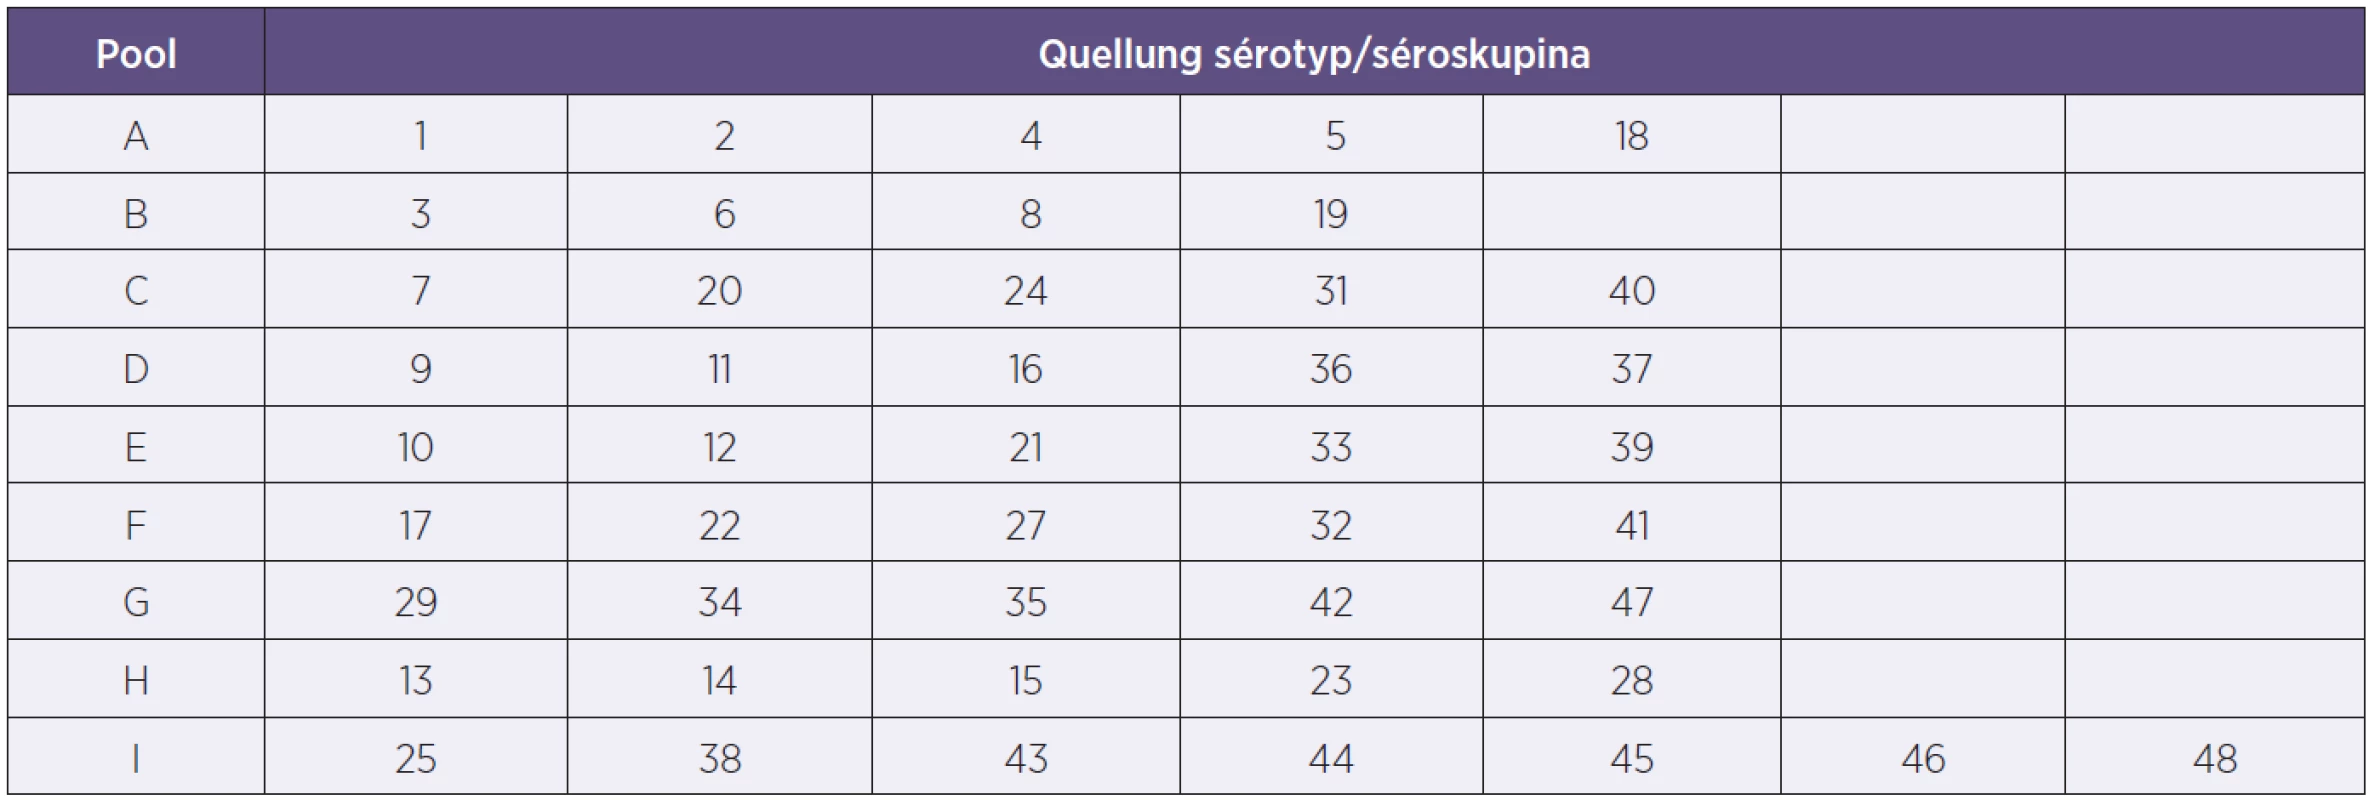 Tabulka sérotypového složení poolových antisér pro Quellung reakce
Table 1. Table of serotype-specific antisera included in the pool for the Quellung reaction